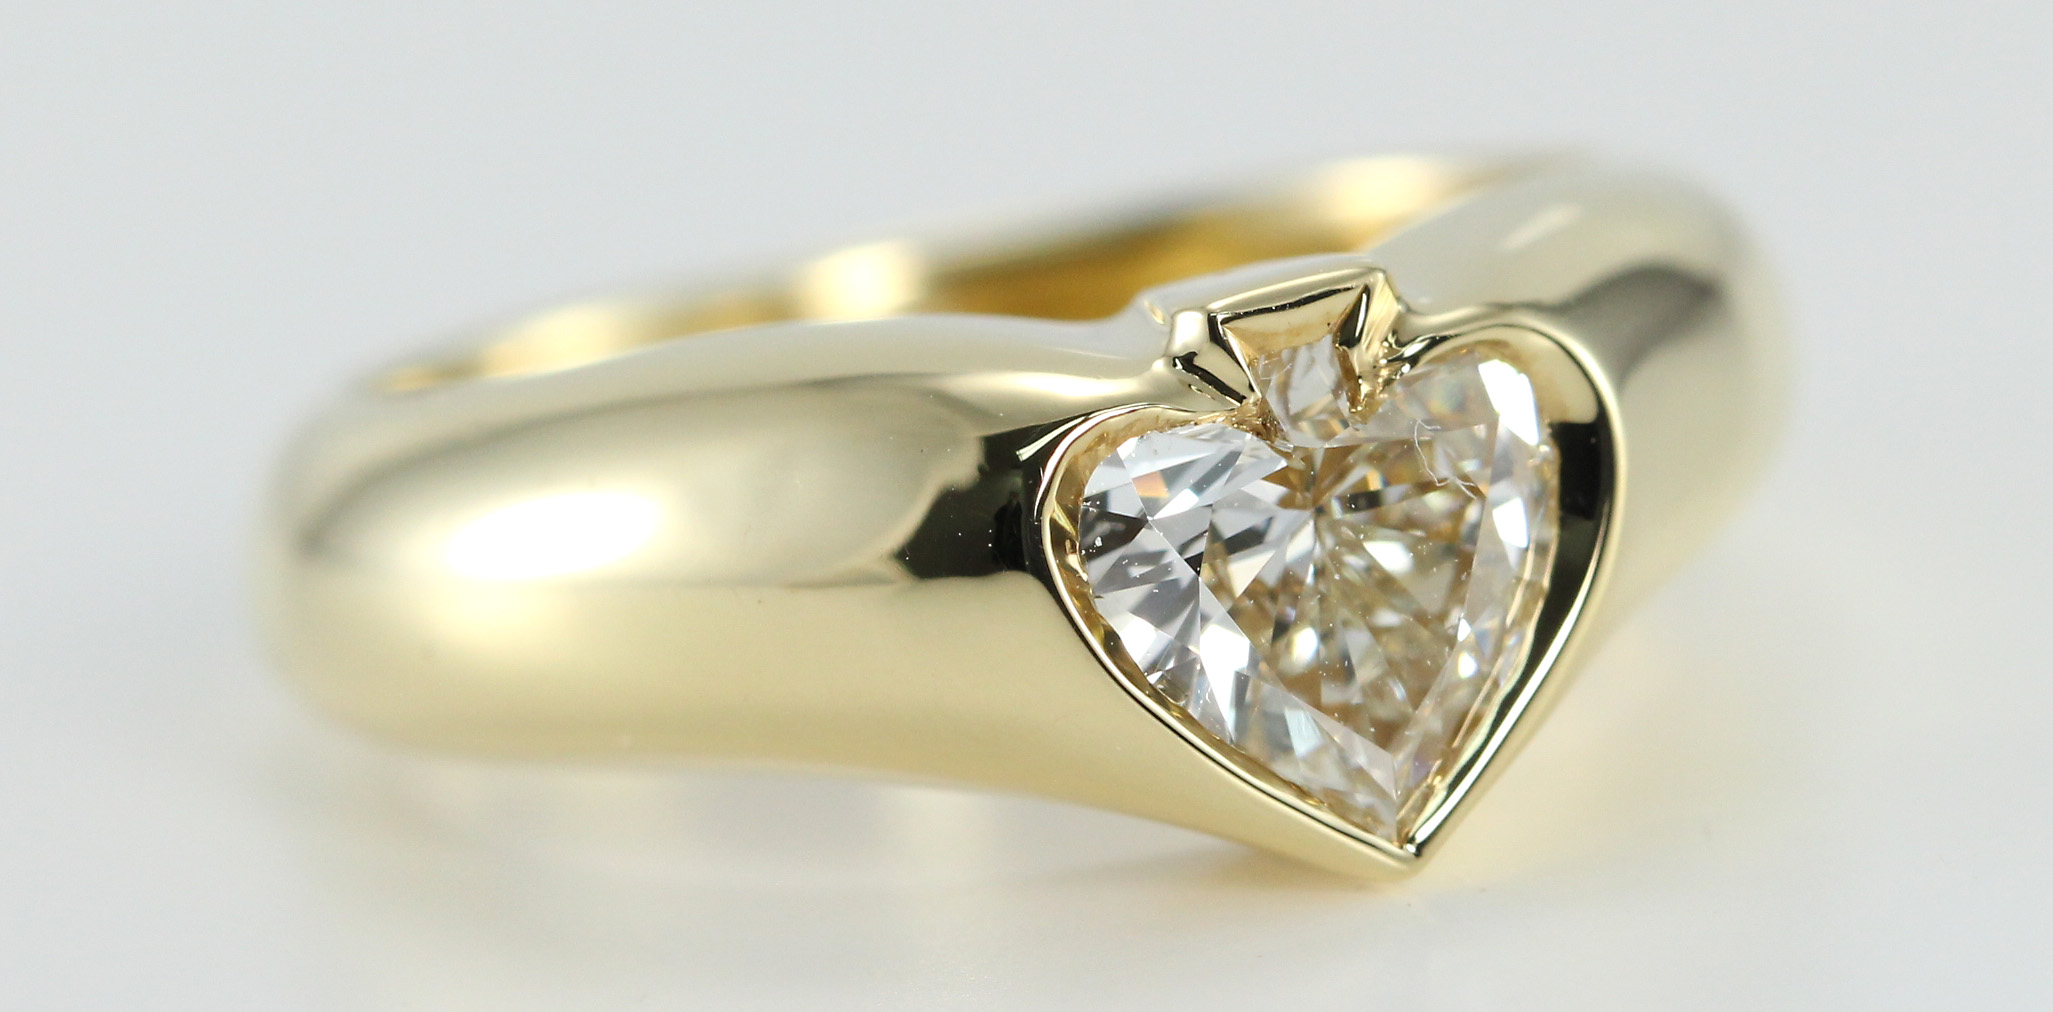 Solitaire diamond ring with bezel setting